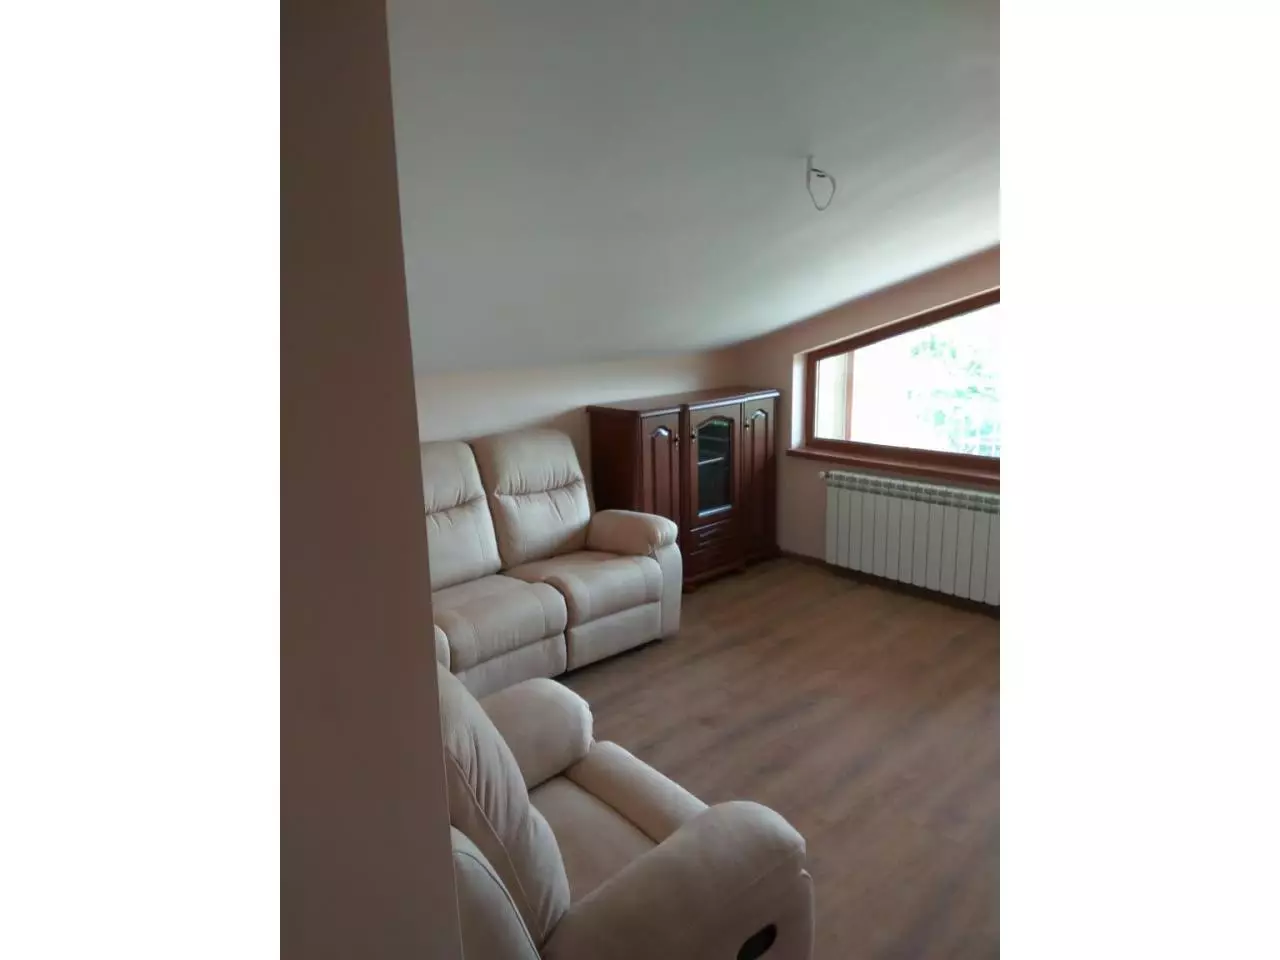 For sale a new house with an area of 370 sq.m. in the Bulgarian - 10/12